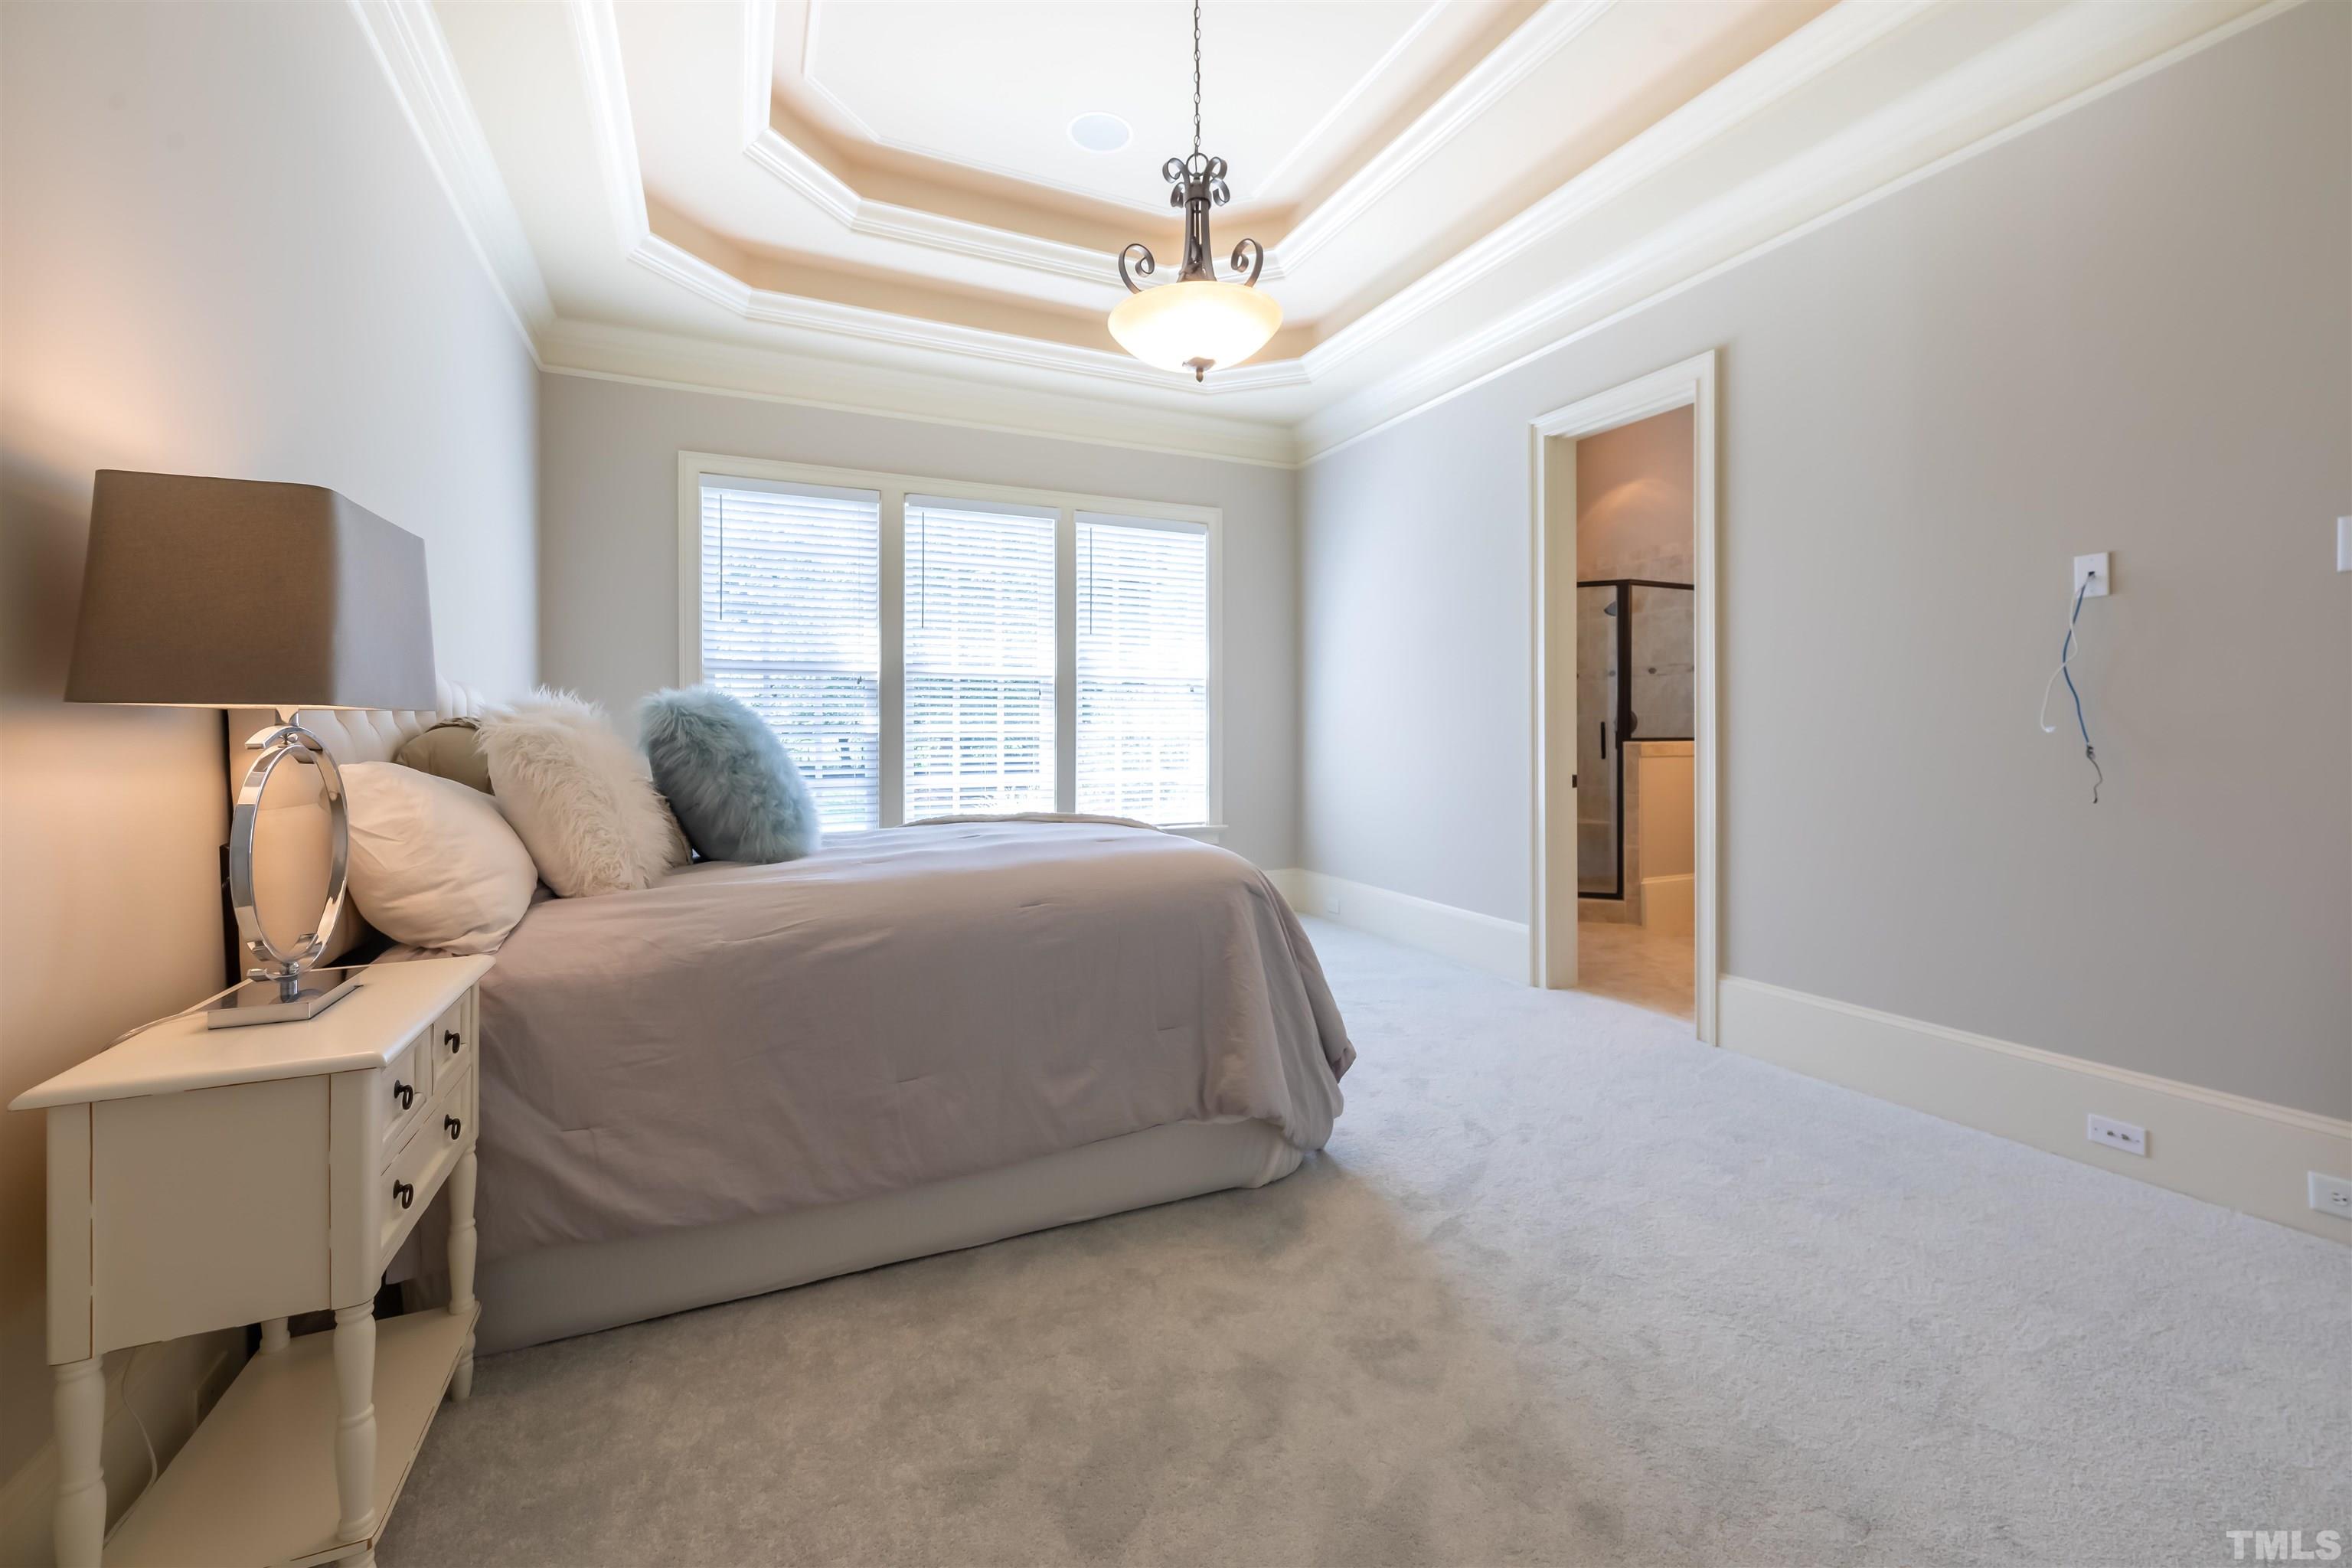 The main floor guest room is quite large and could be a secondary master.  It has its own bath with a walk in shower and closet . Notice the triple tray in this room as well.  The builder did not miss a beat in creating a one of a kind home.  New carpet.